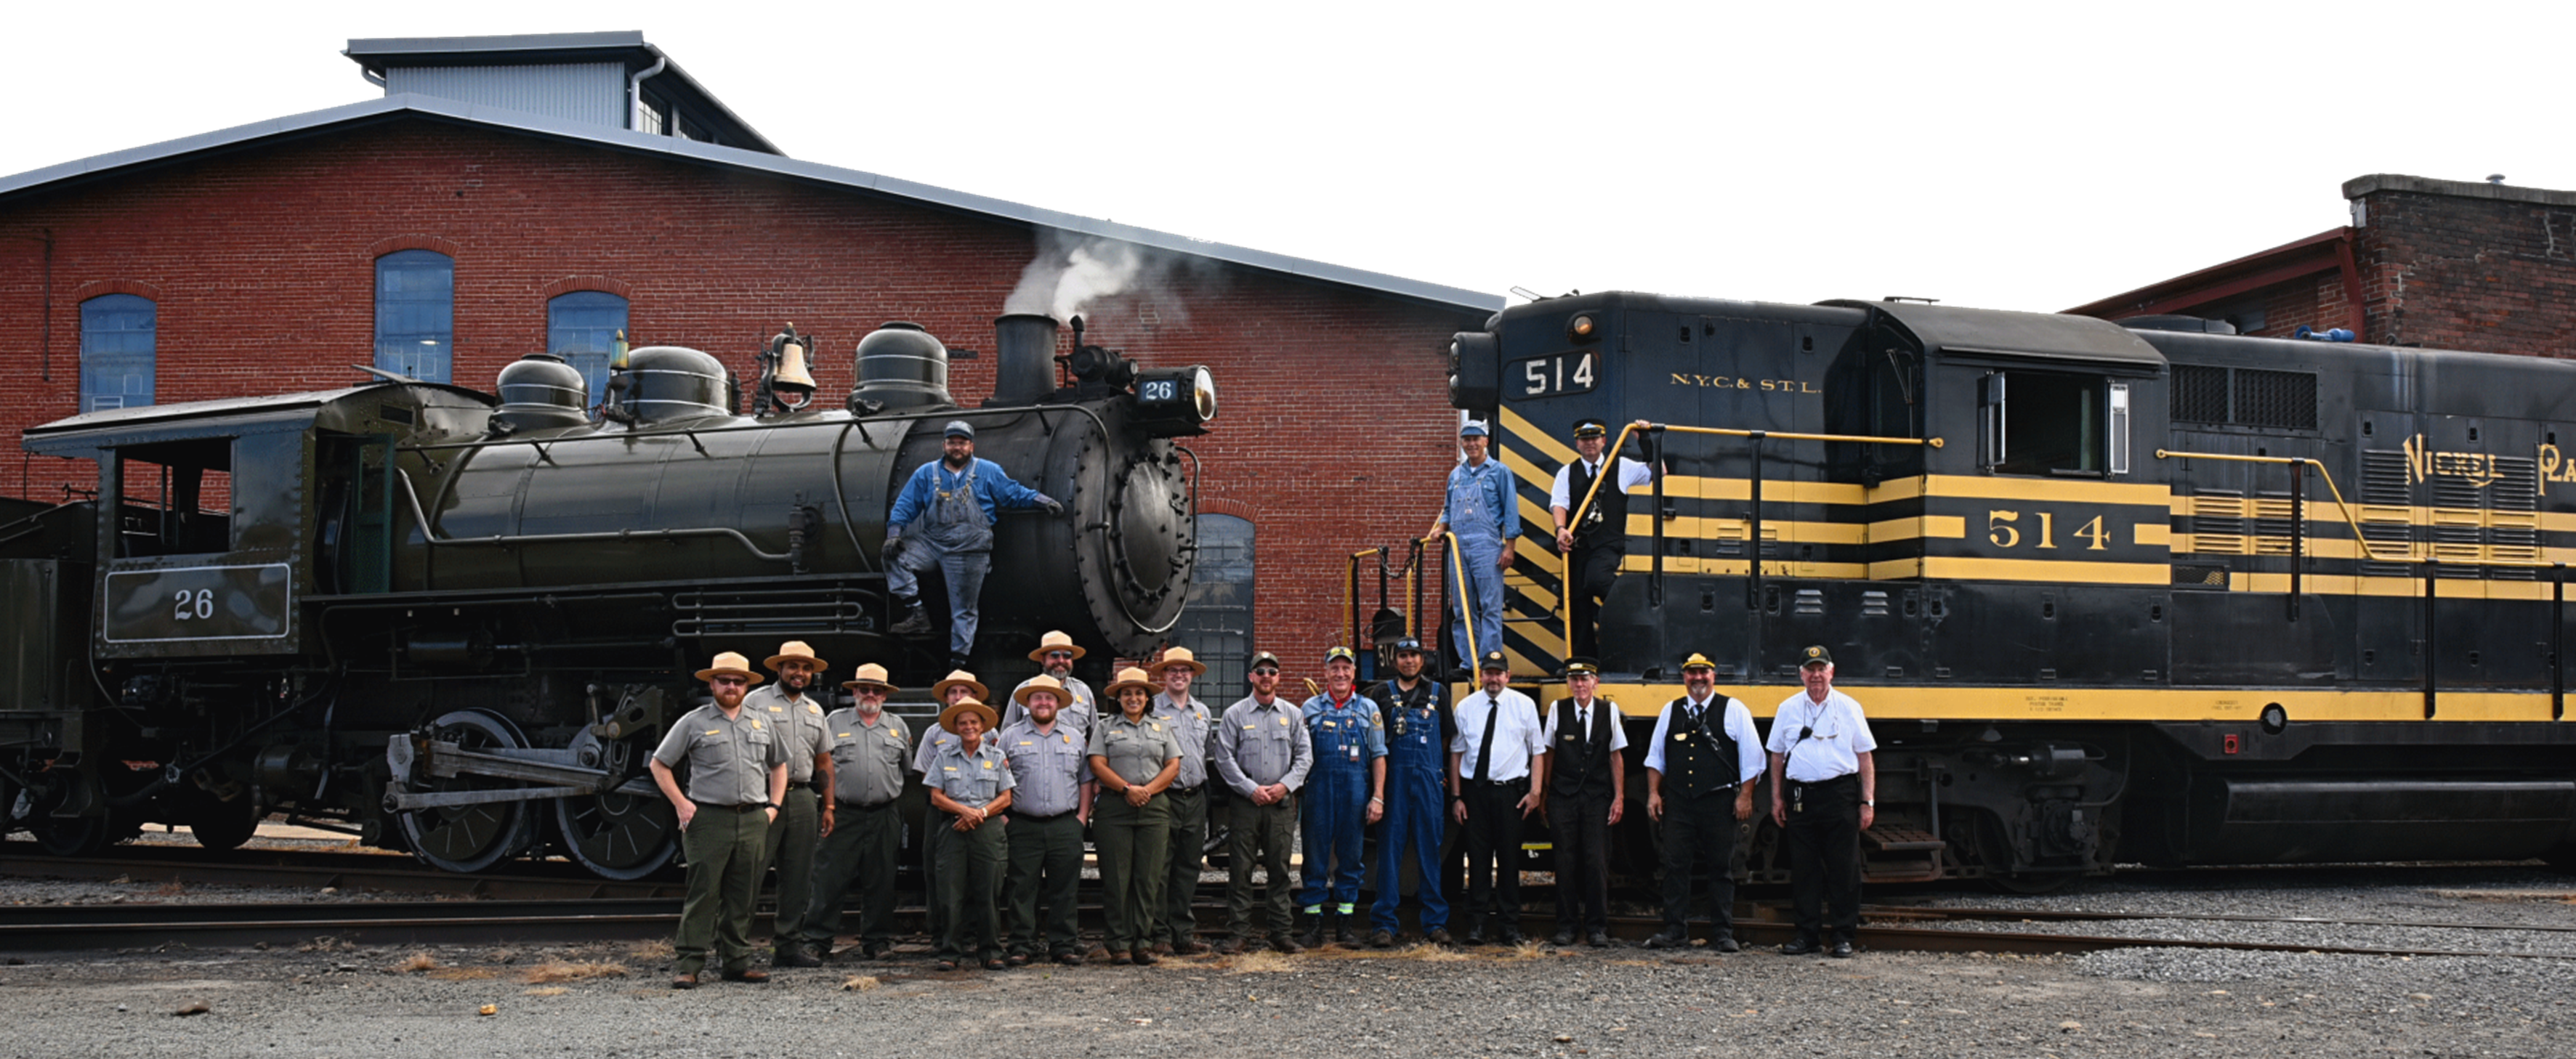 Group photo in front of a steam locomotive and diesel locomotive.